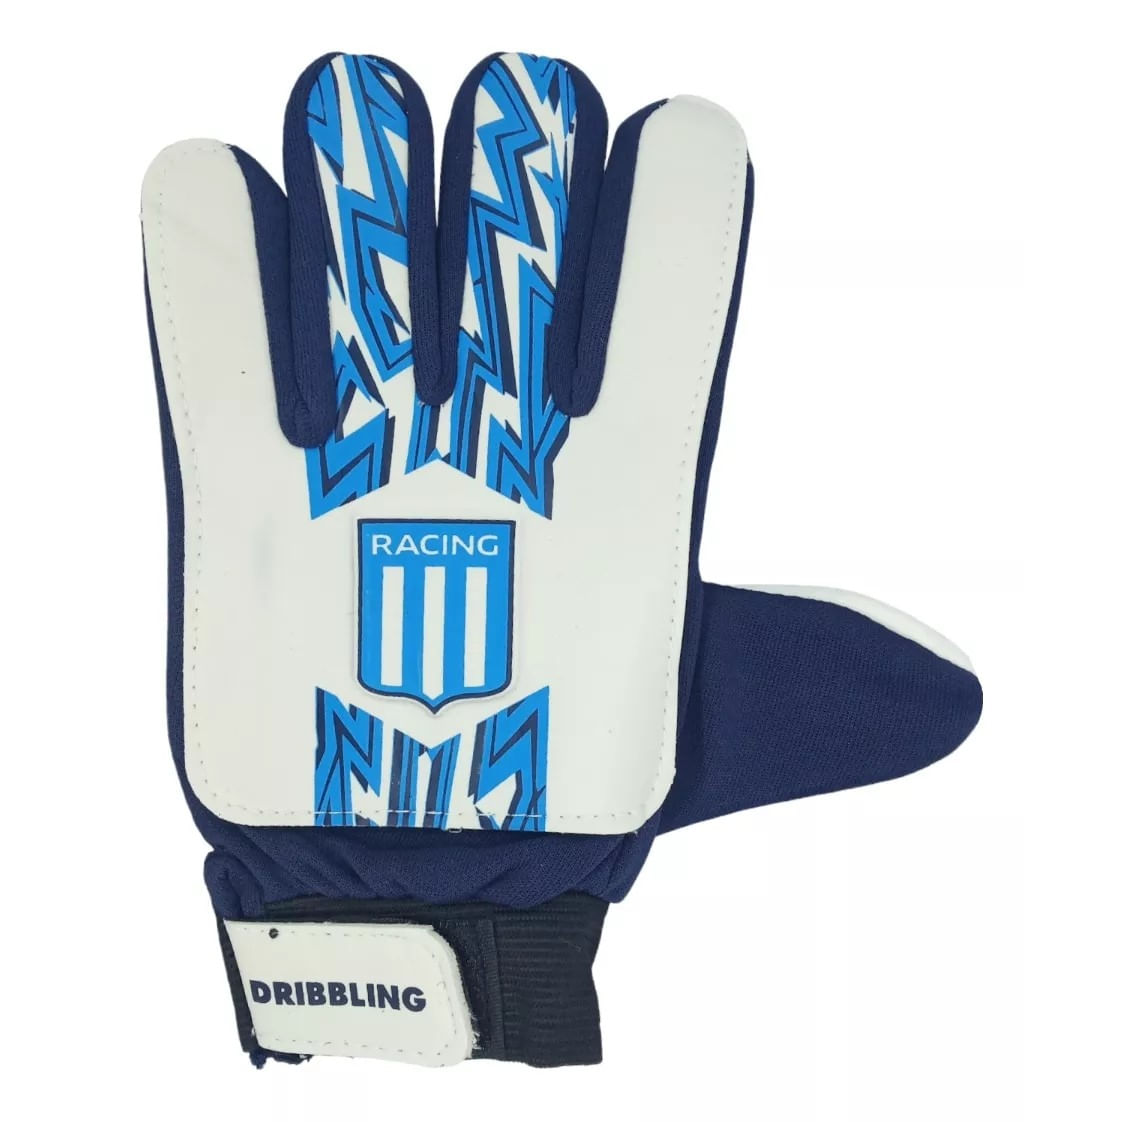 GUANTES DRB BOXEO CLASICO PU NG/AM